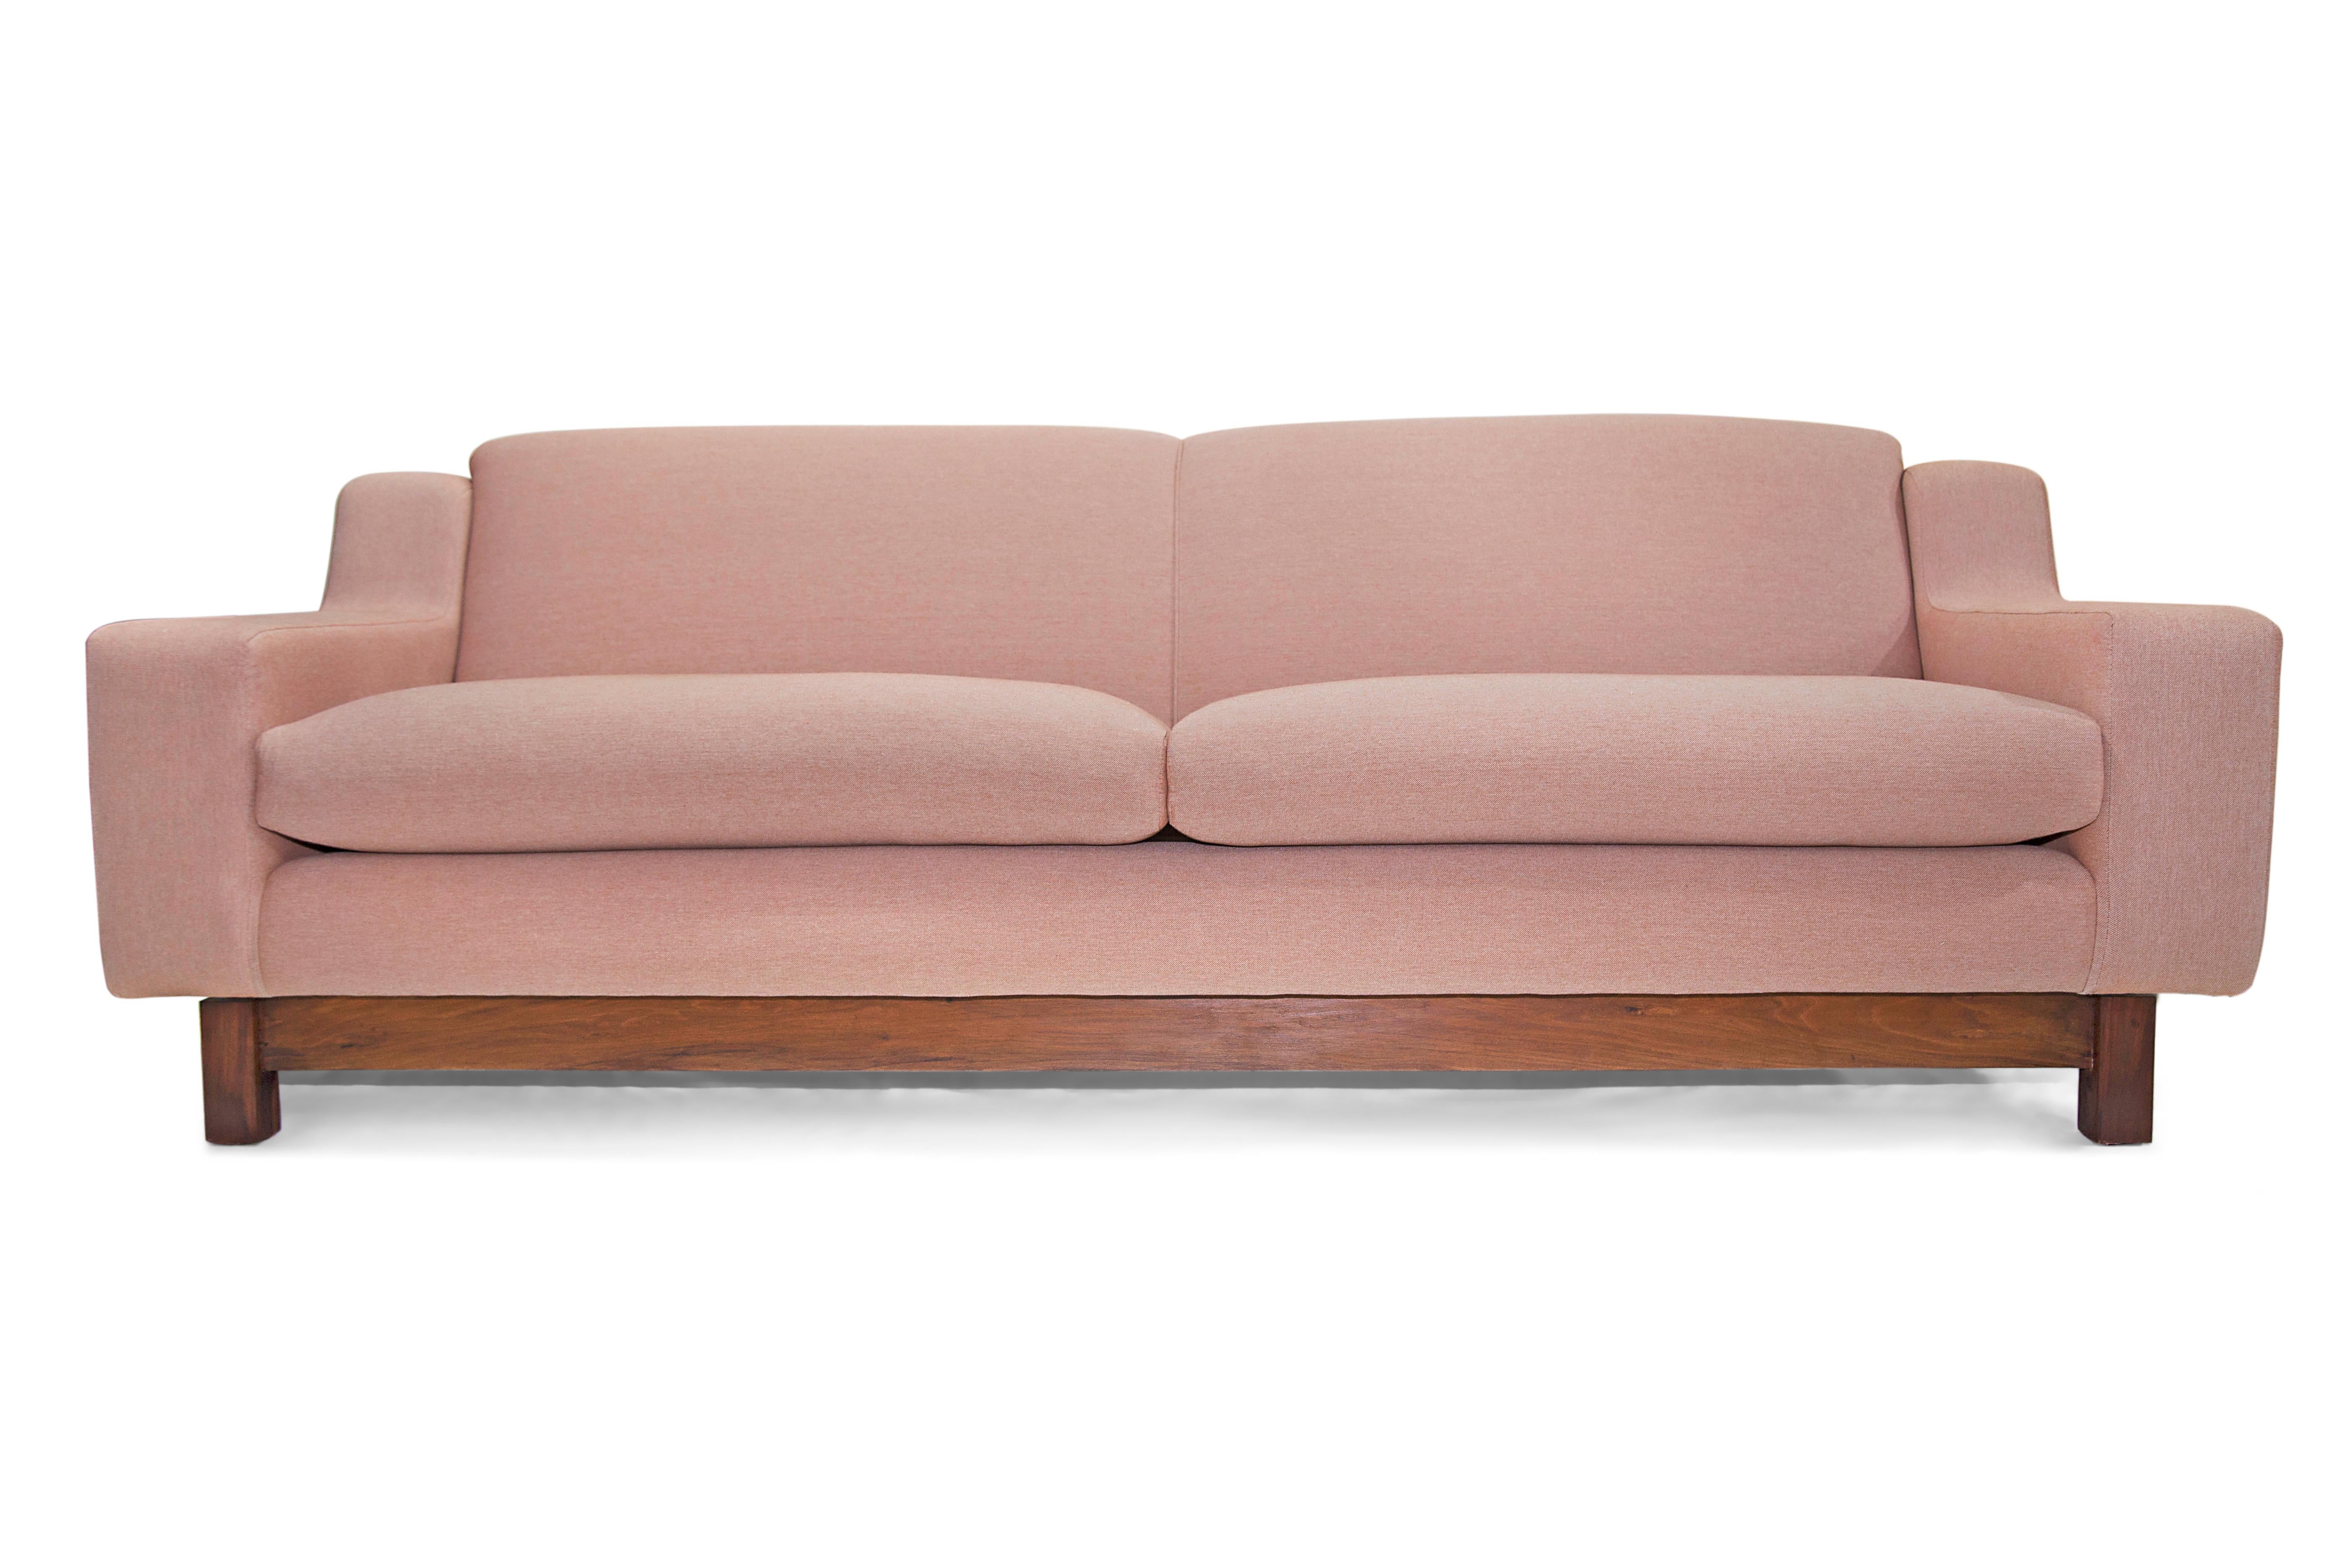 Brazilian Modern Sofa in Pink Linen & Hardwood, Sergio Rodrigues, 1960  In Good Condition For Sale In New York, NY